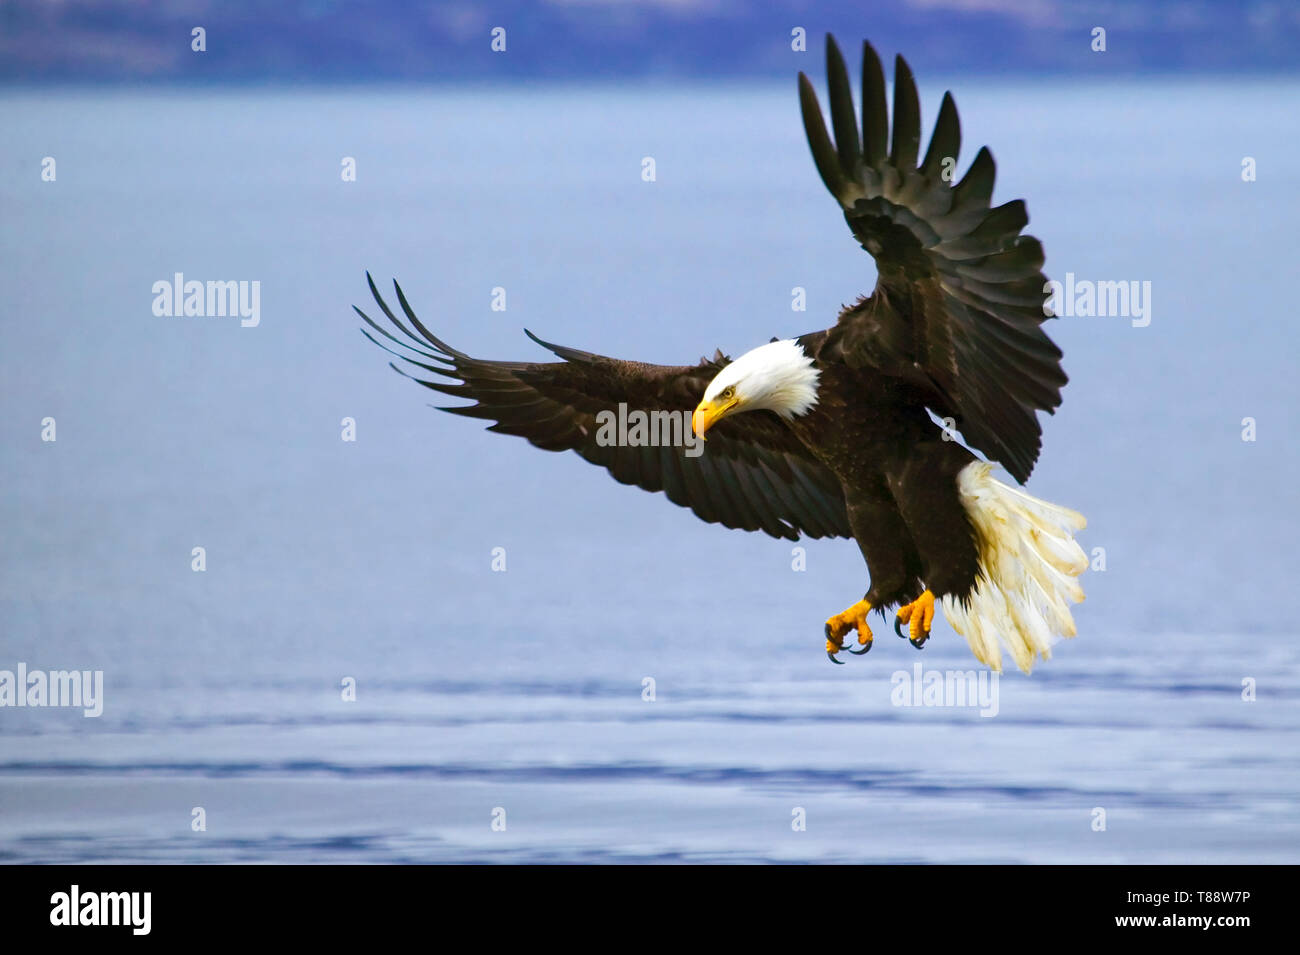 American Bald Eagle with spread wings ready to catch a fish Stock Photo